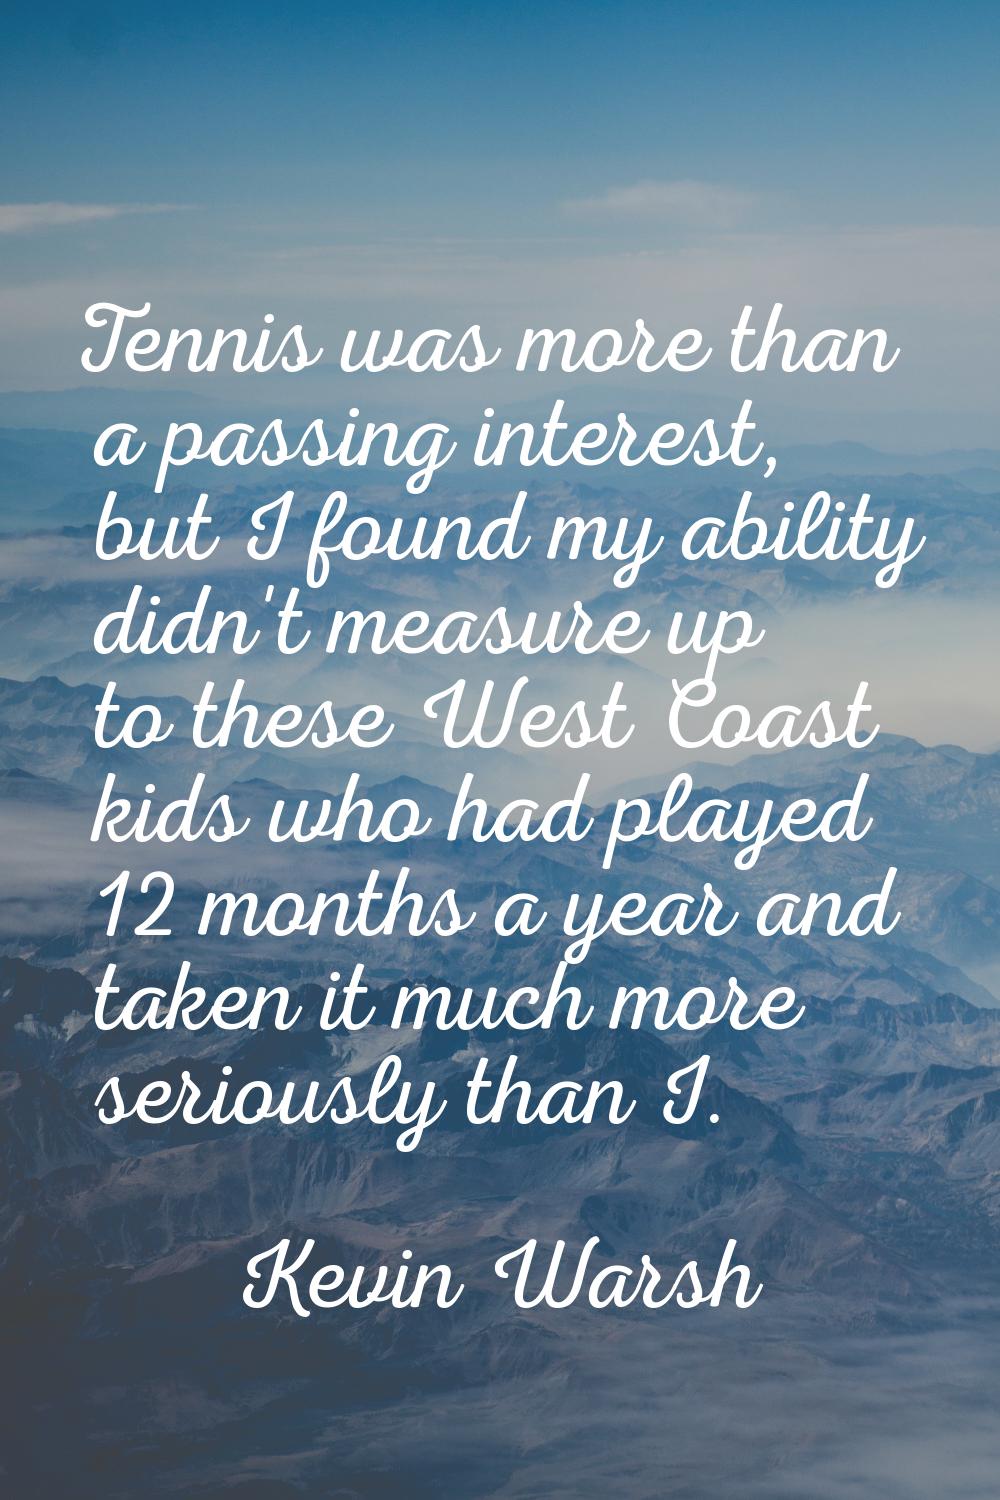 Tennis was more than a passing interest, but I found my ability didn't measure up to these West Coa